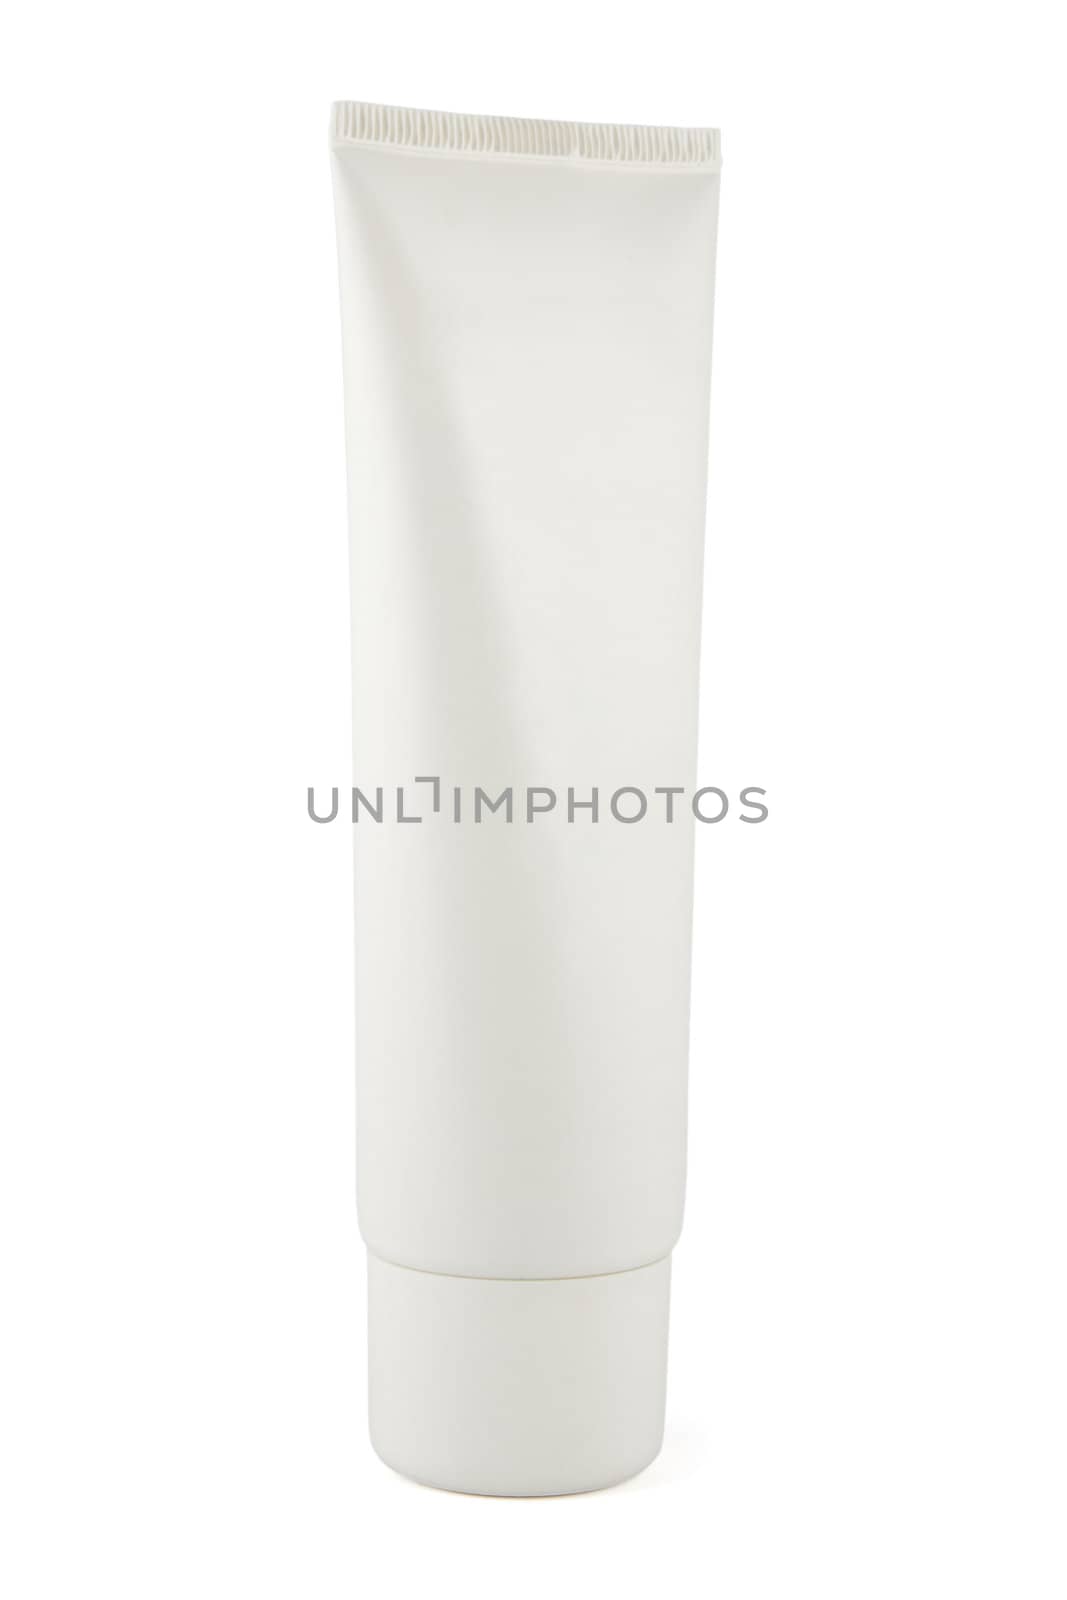 Standing White Tube with copy space by devulderj